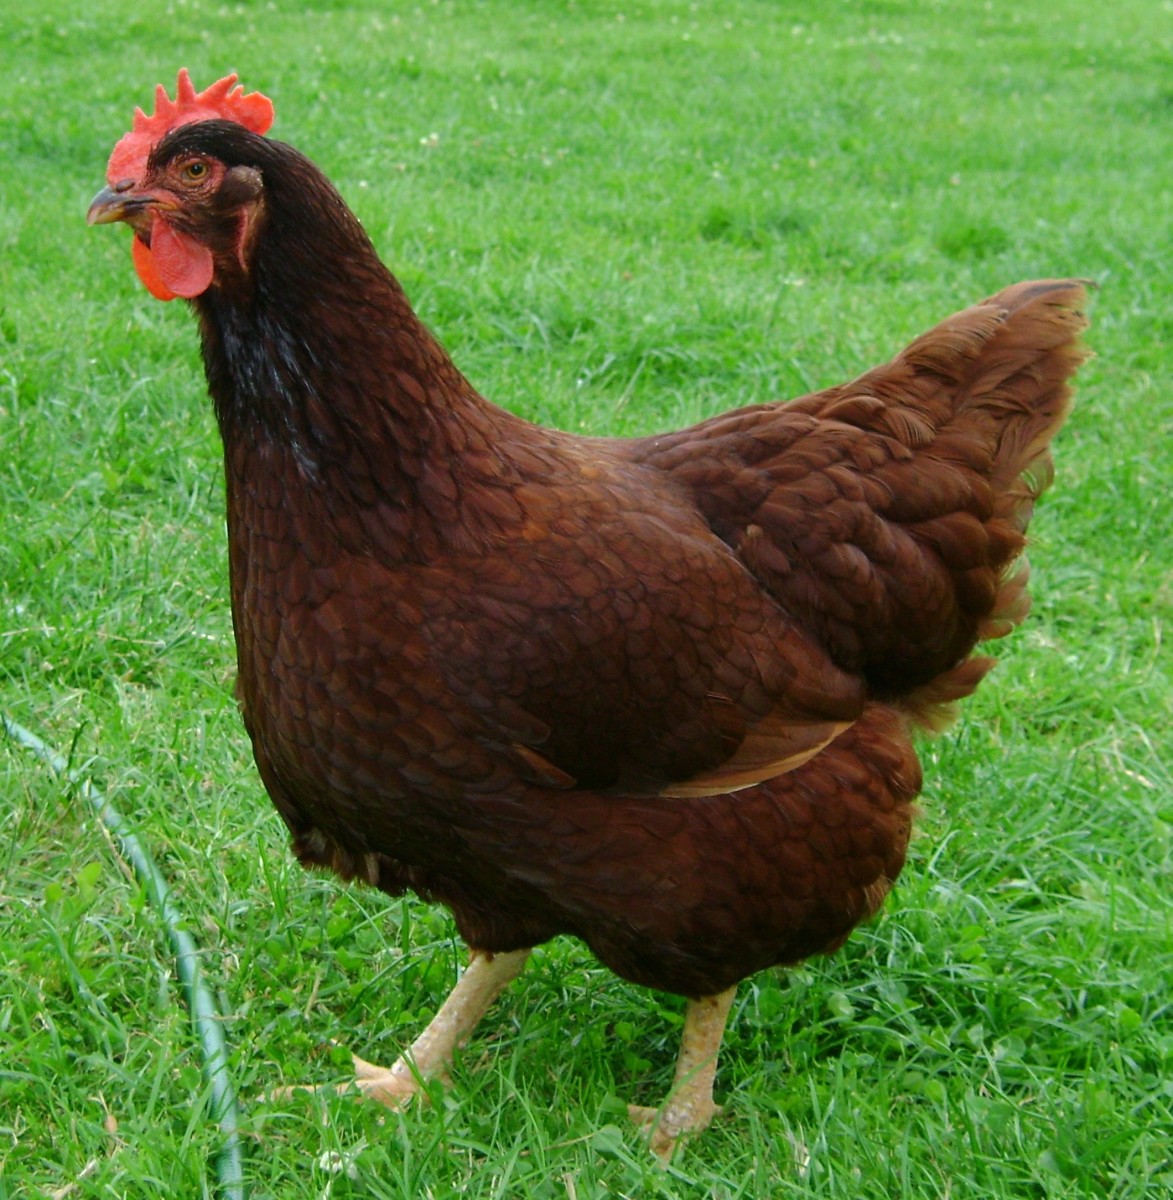 Rhode island red are good as layers as well as meat producers